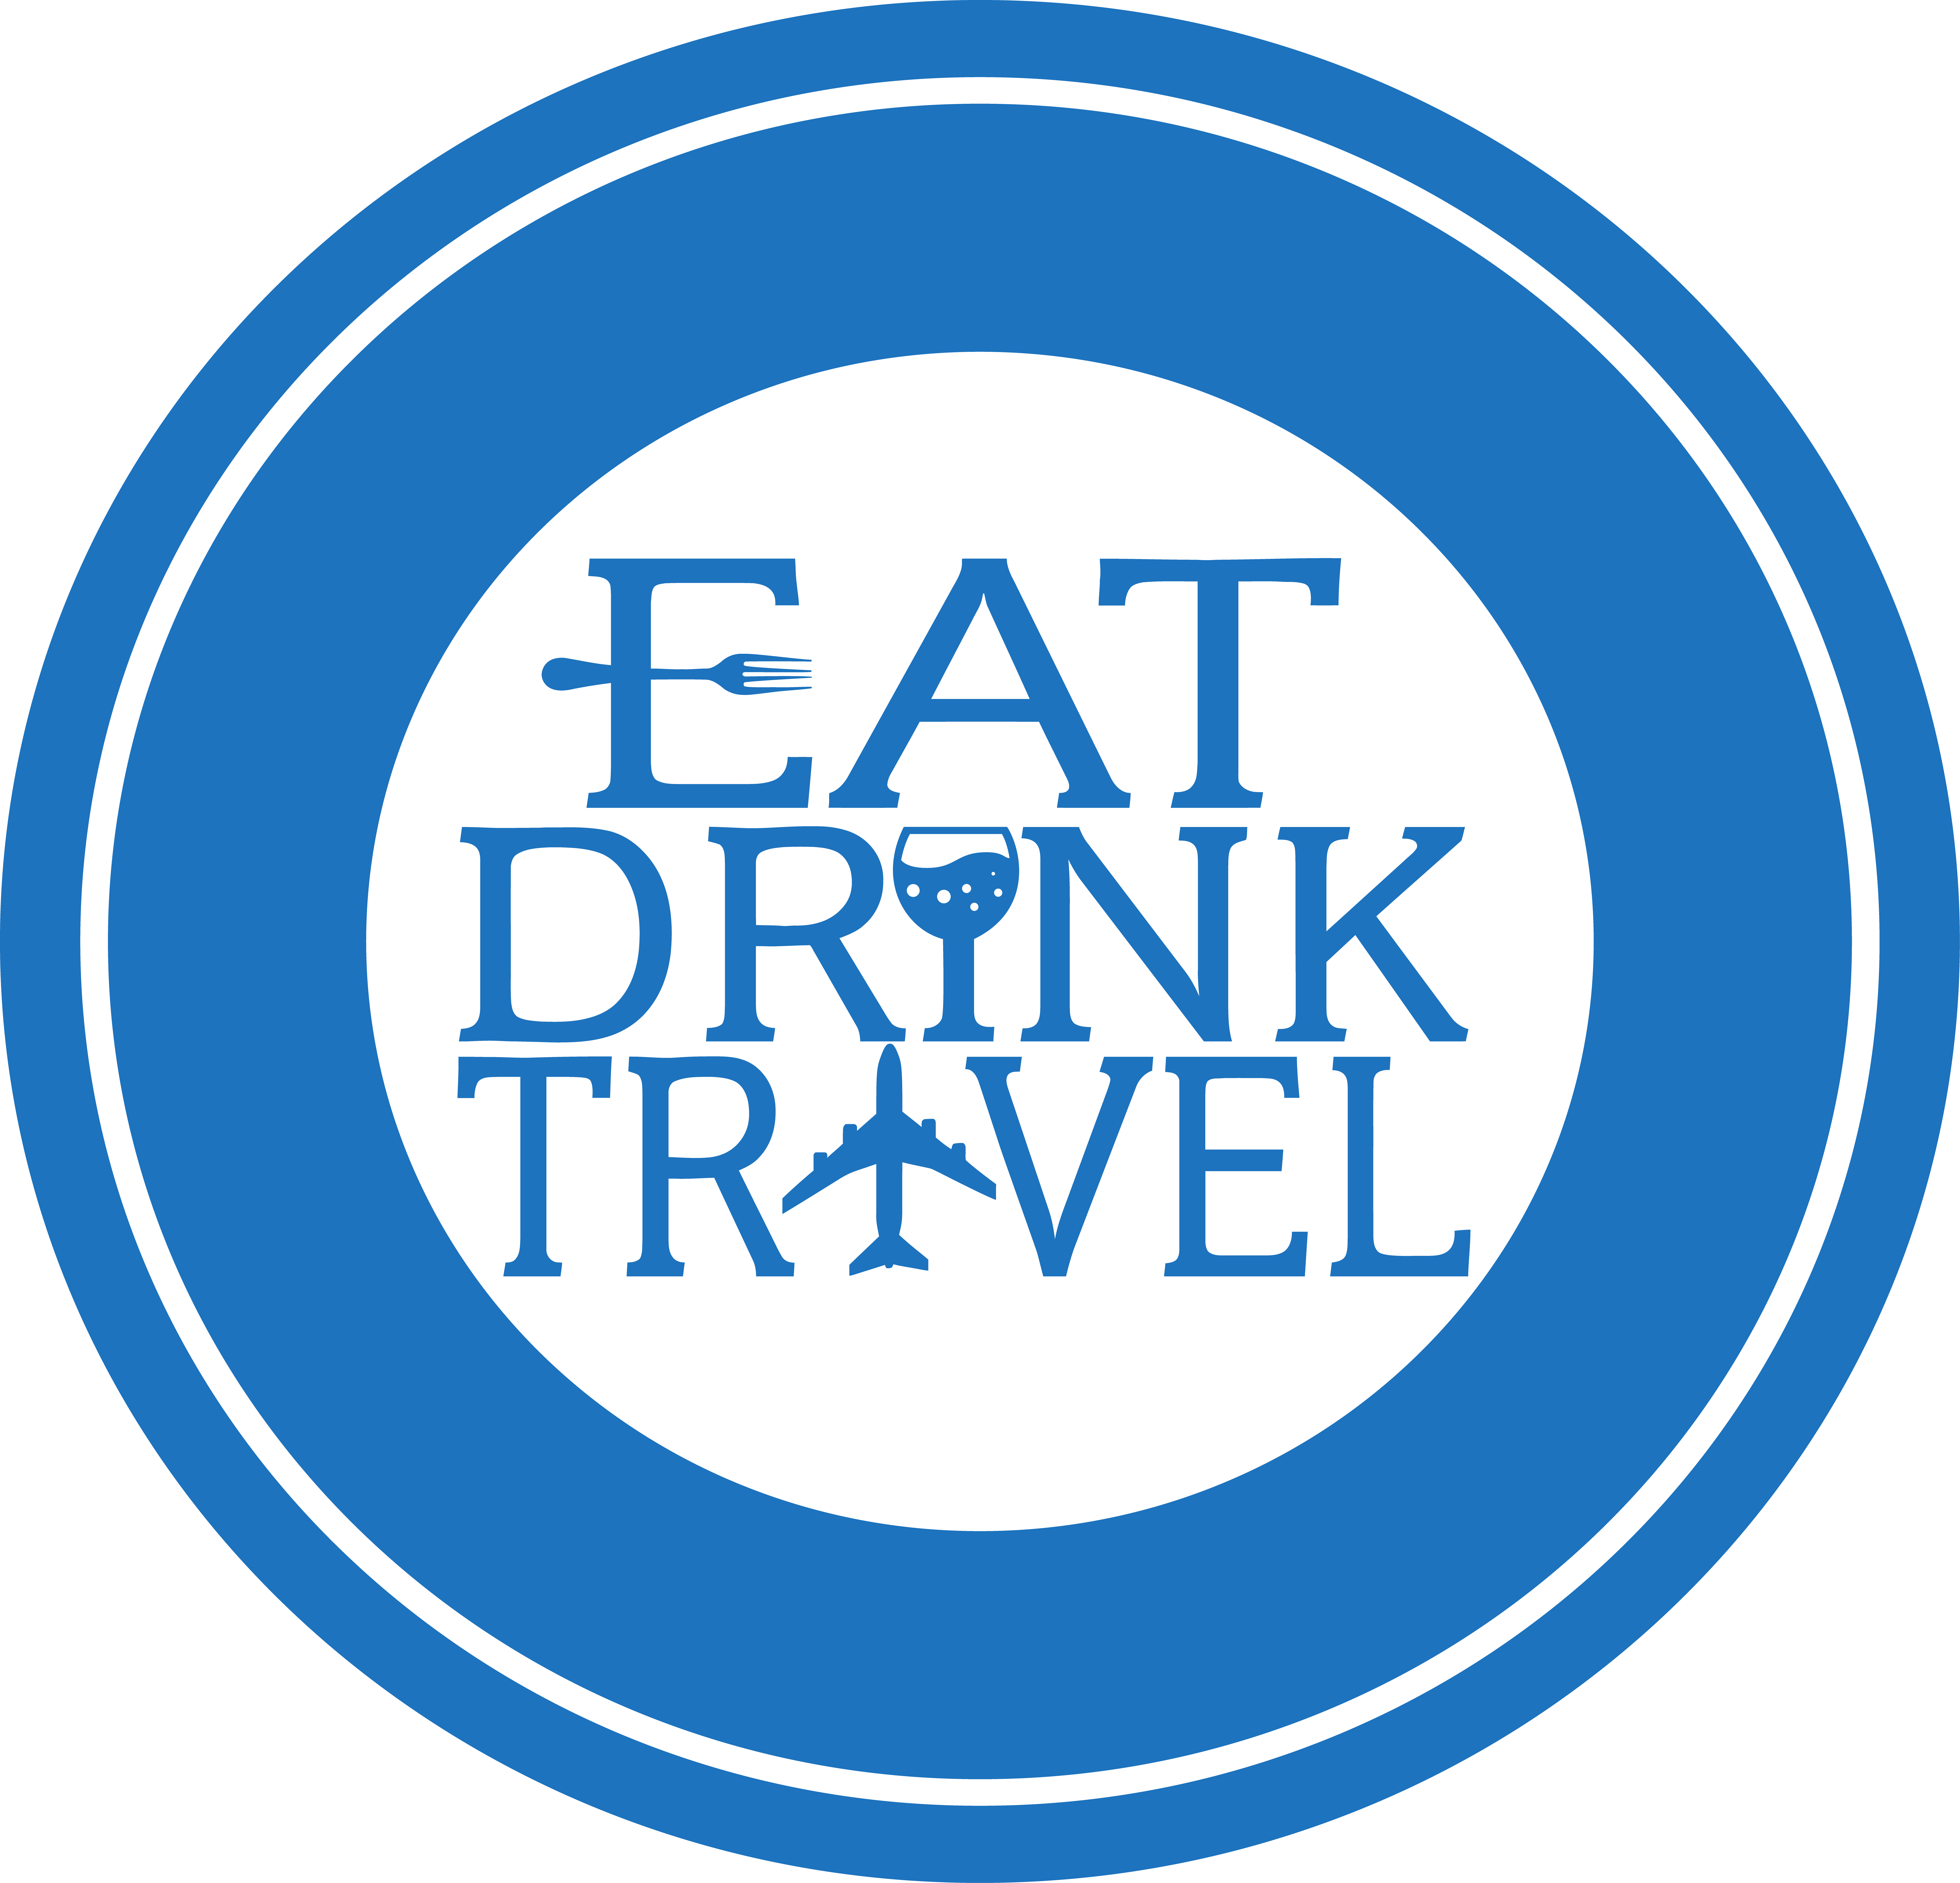 Eat Drink Travel Group | About us - Eat Drink Travel Group